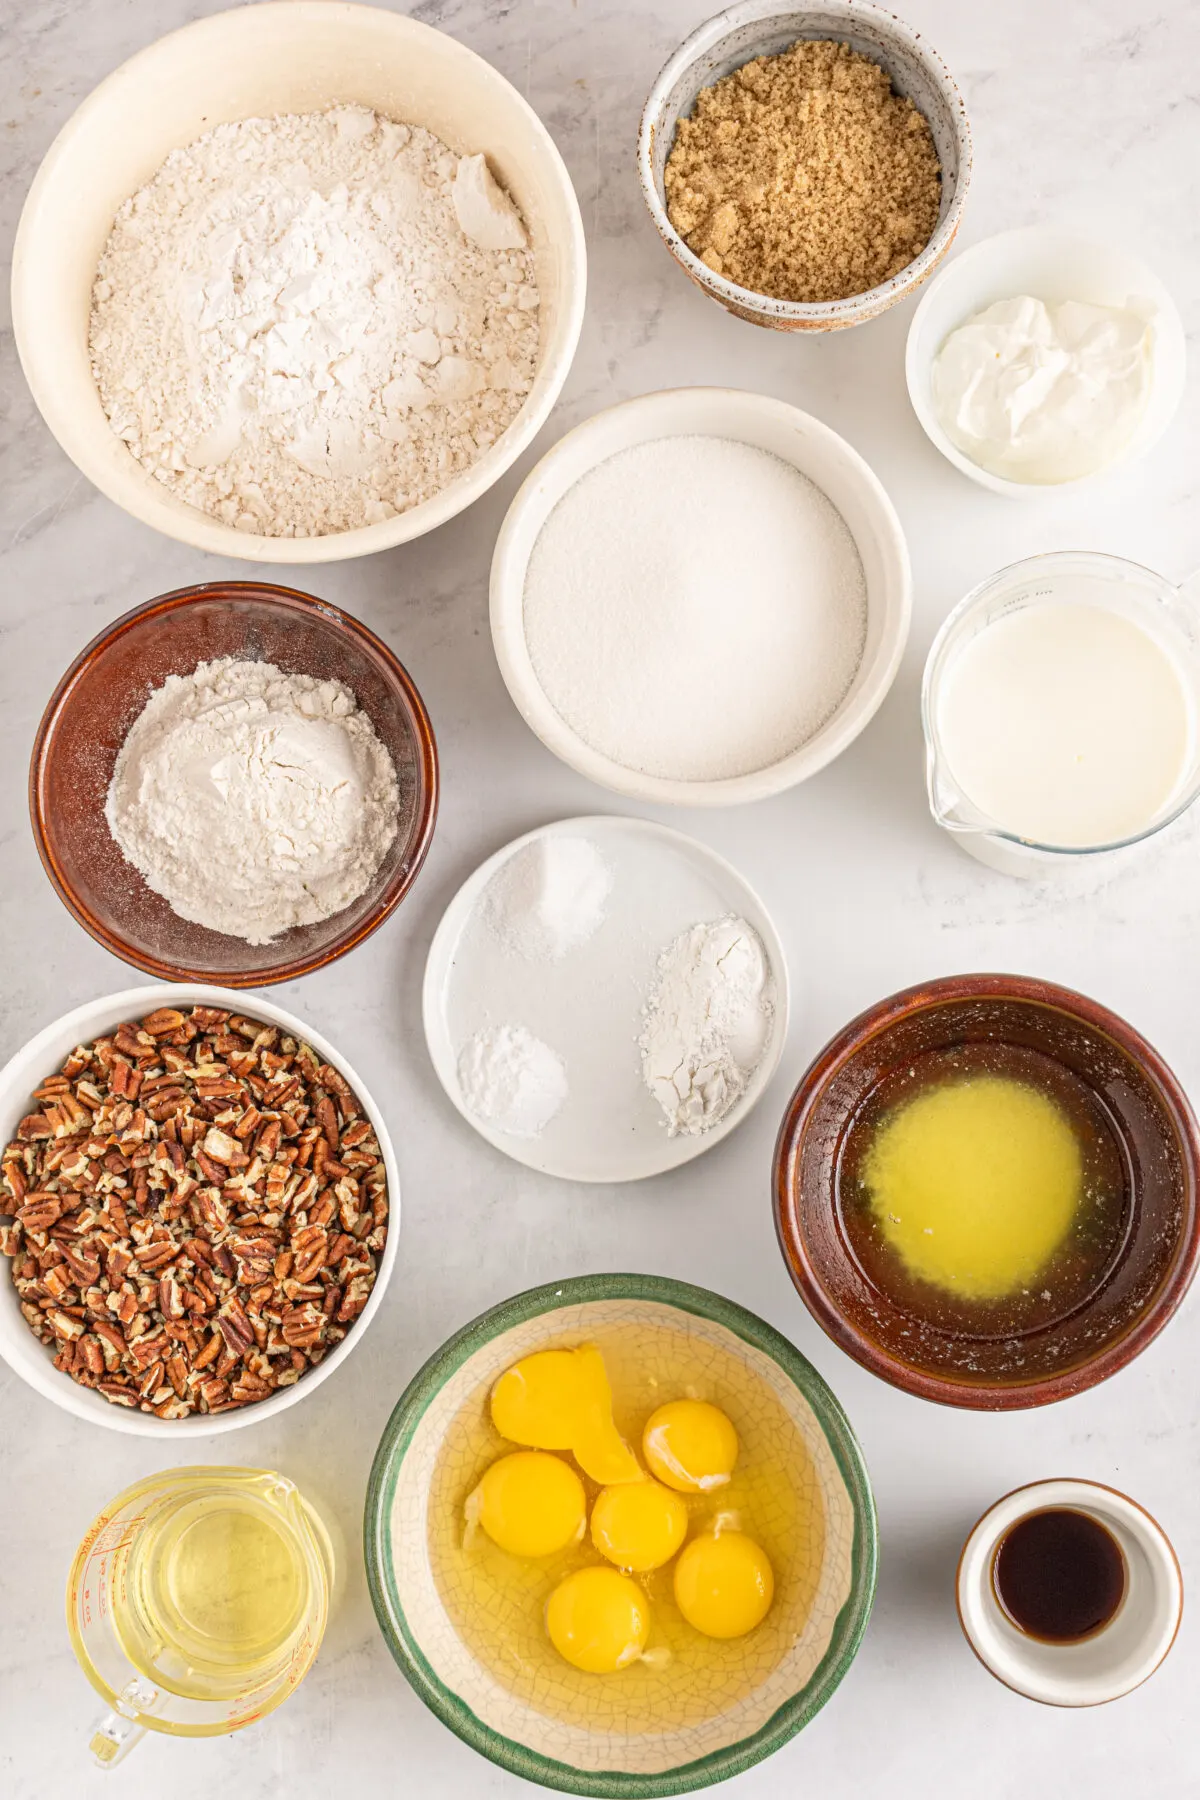 About the ingredients for butter pecan cake.